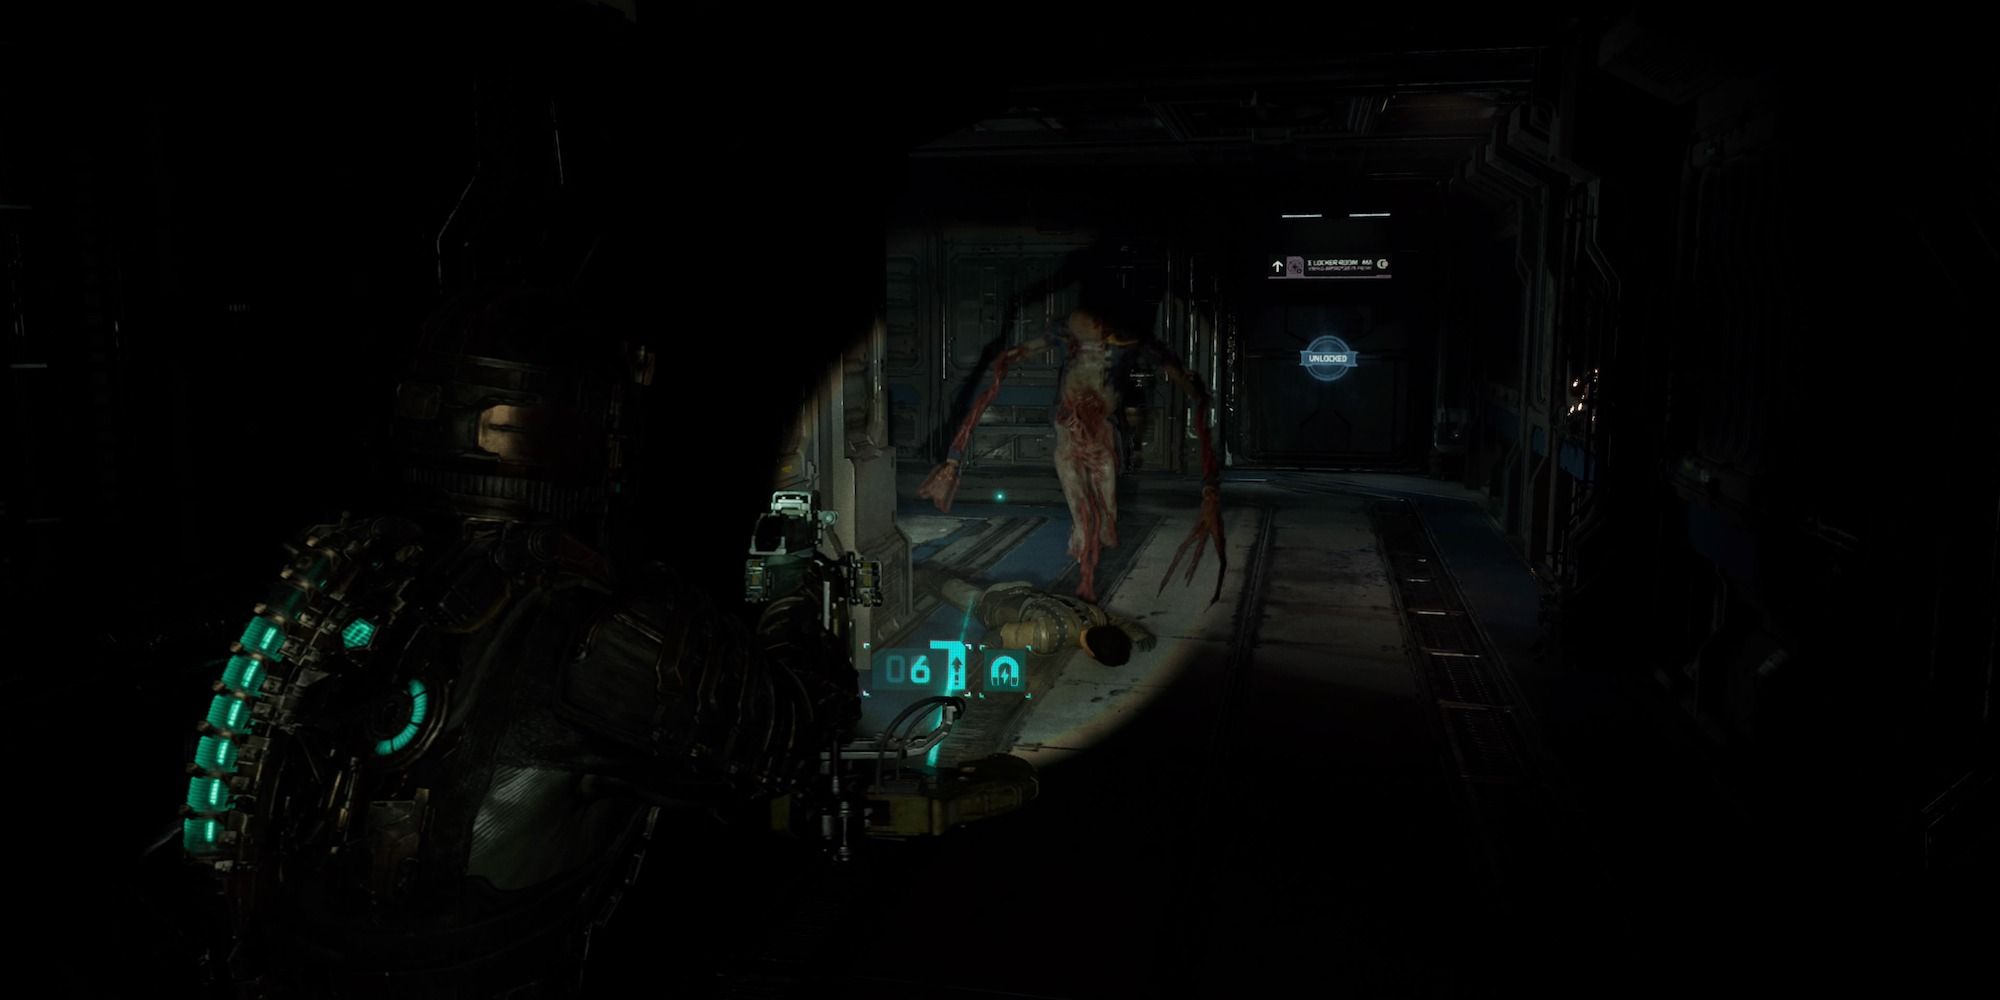 dead space aiming at necromorph